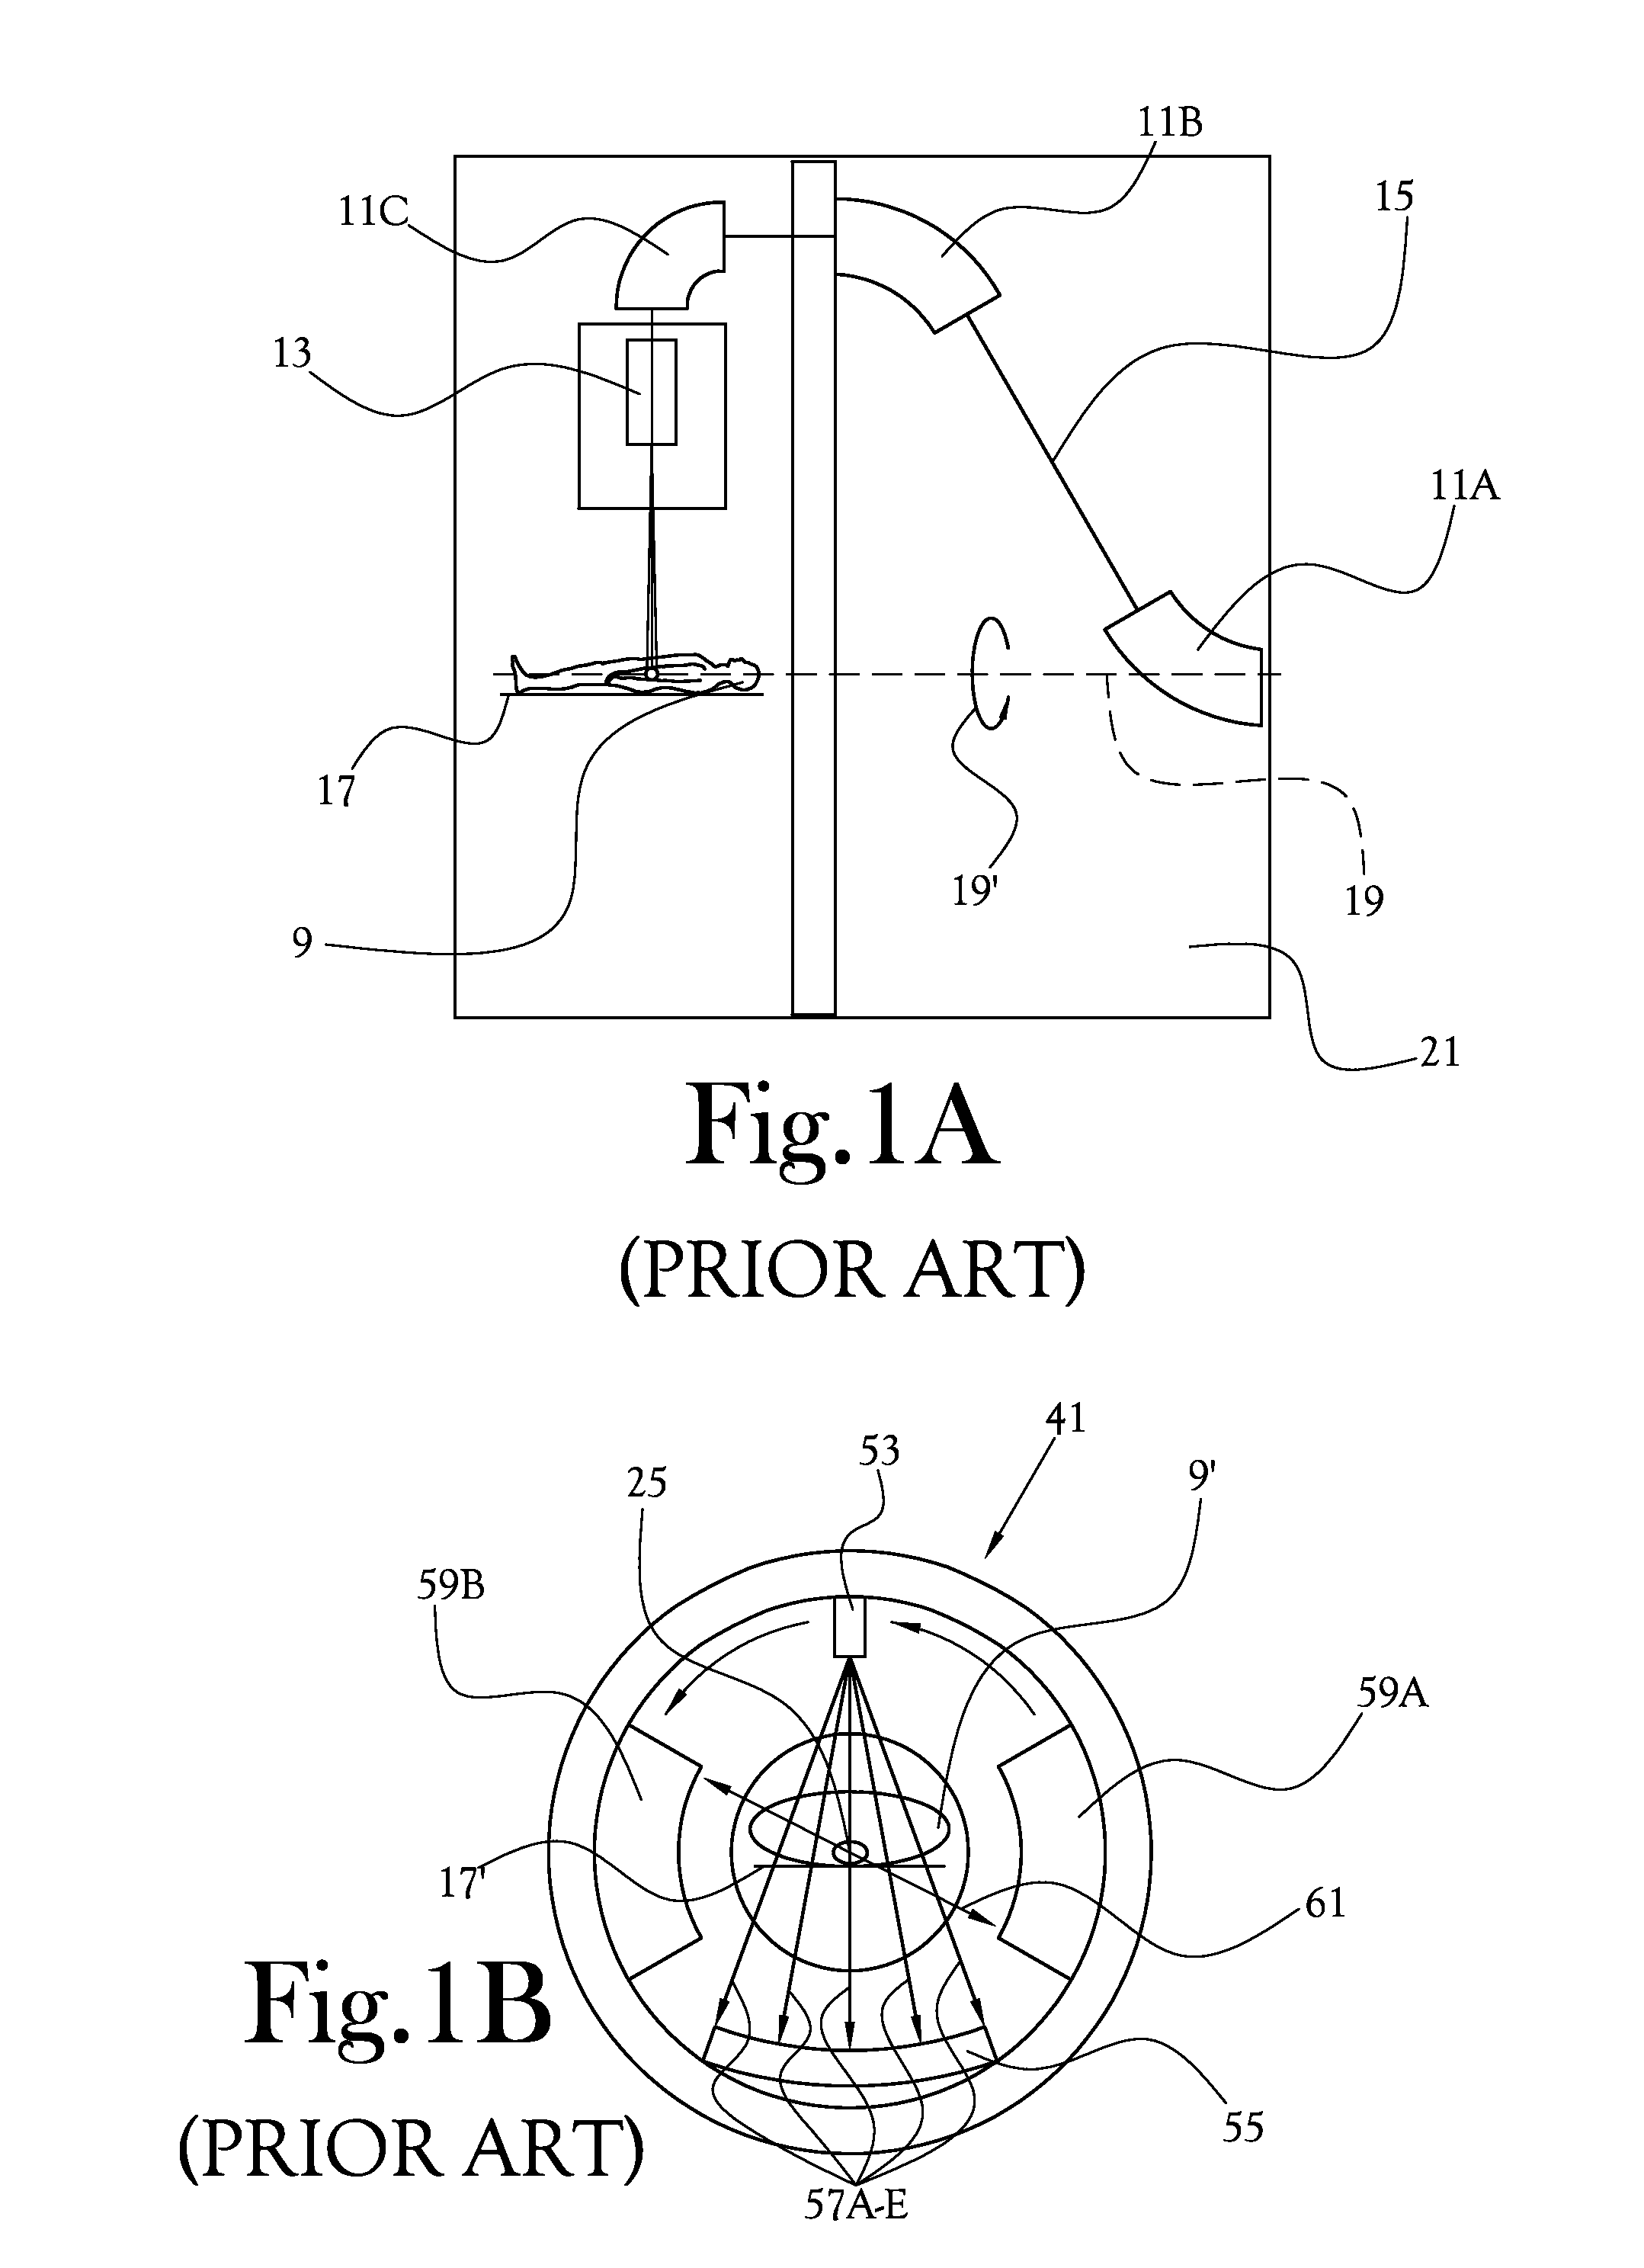 Simultaneous Imaging and Particle Therapy Treatment system and Method